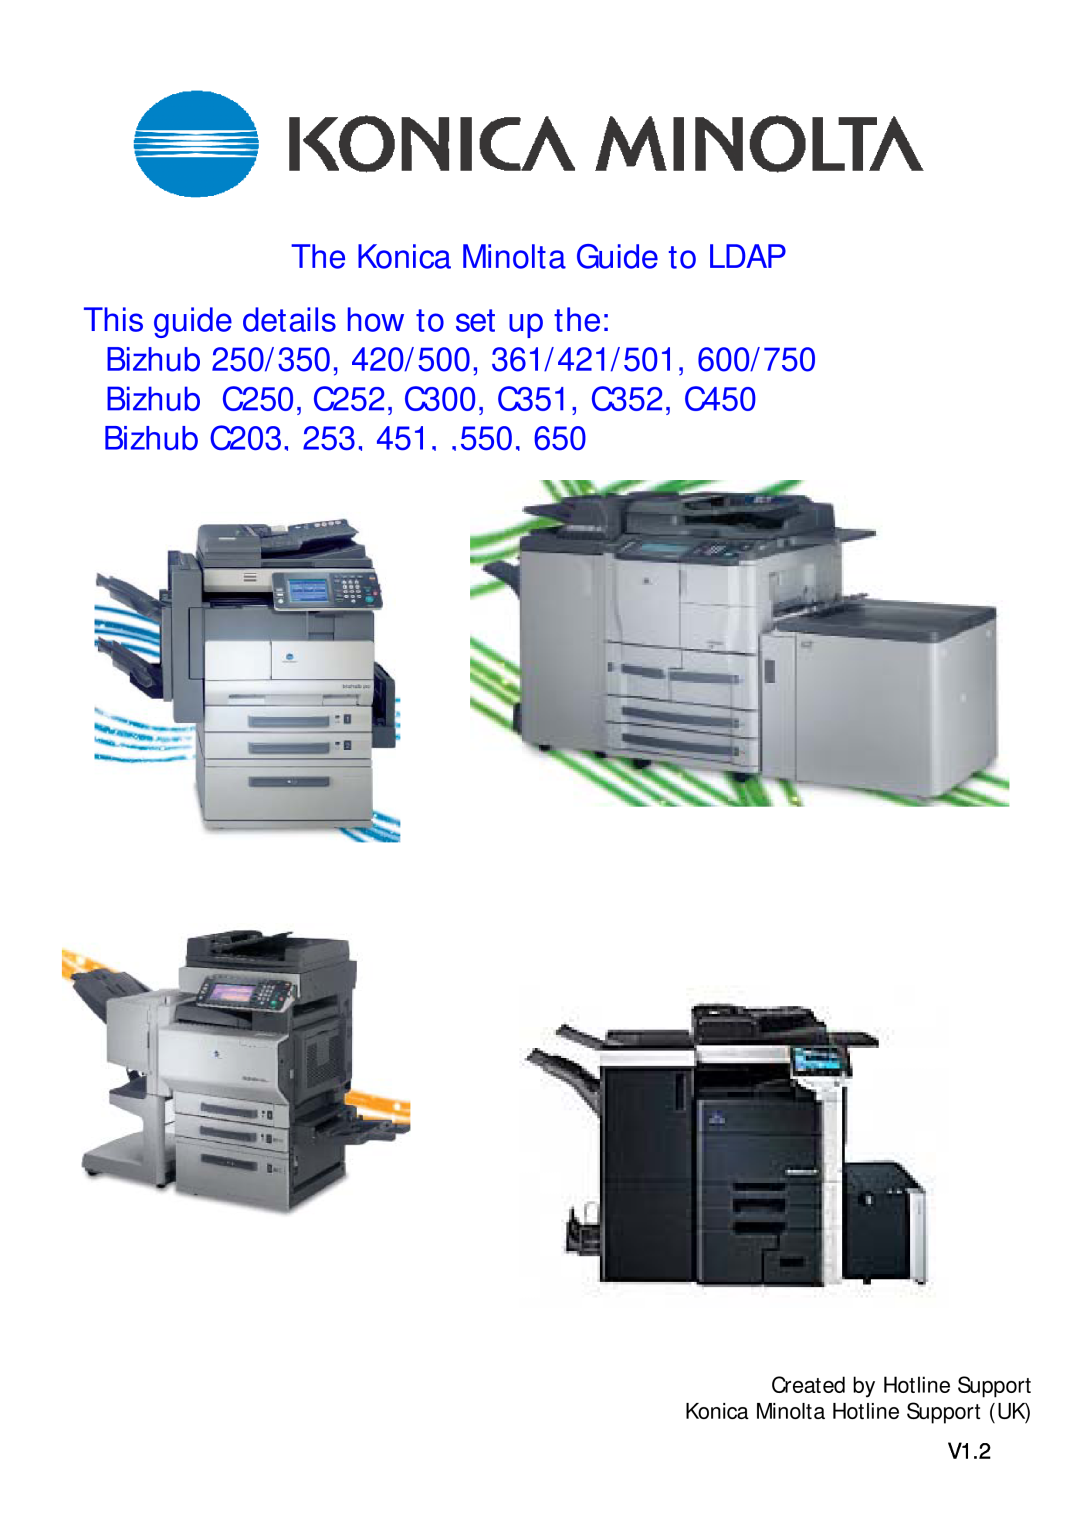 Konica Minolta 650, C351, 361/421/501, 420/500 manual The Konica Minolta Guide to LDAP, This guide details how to set up the 